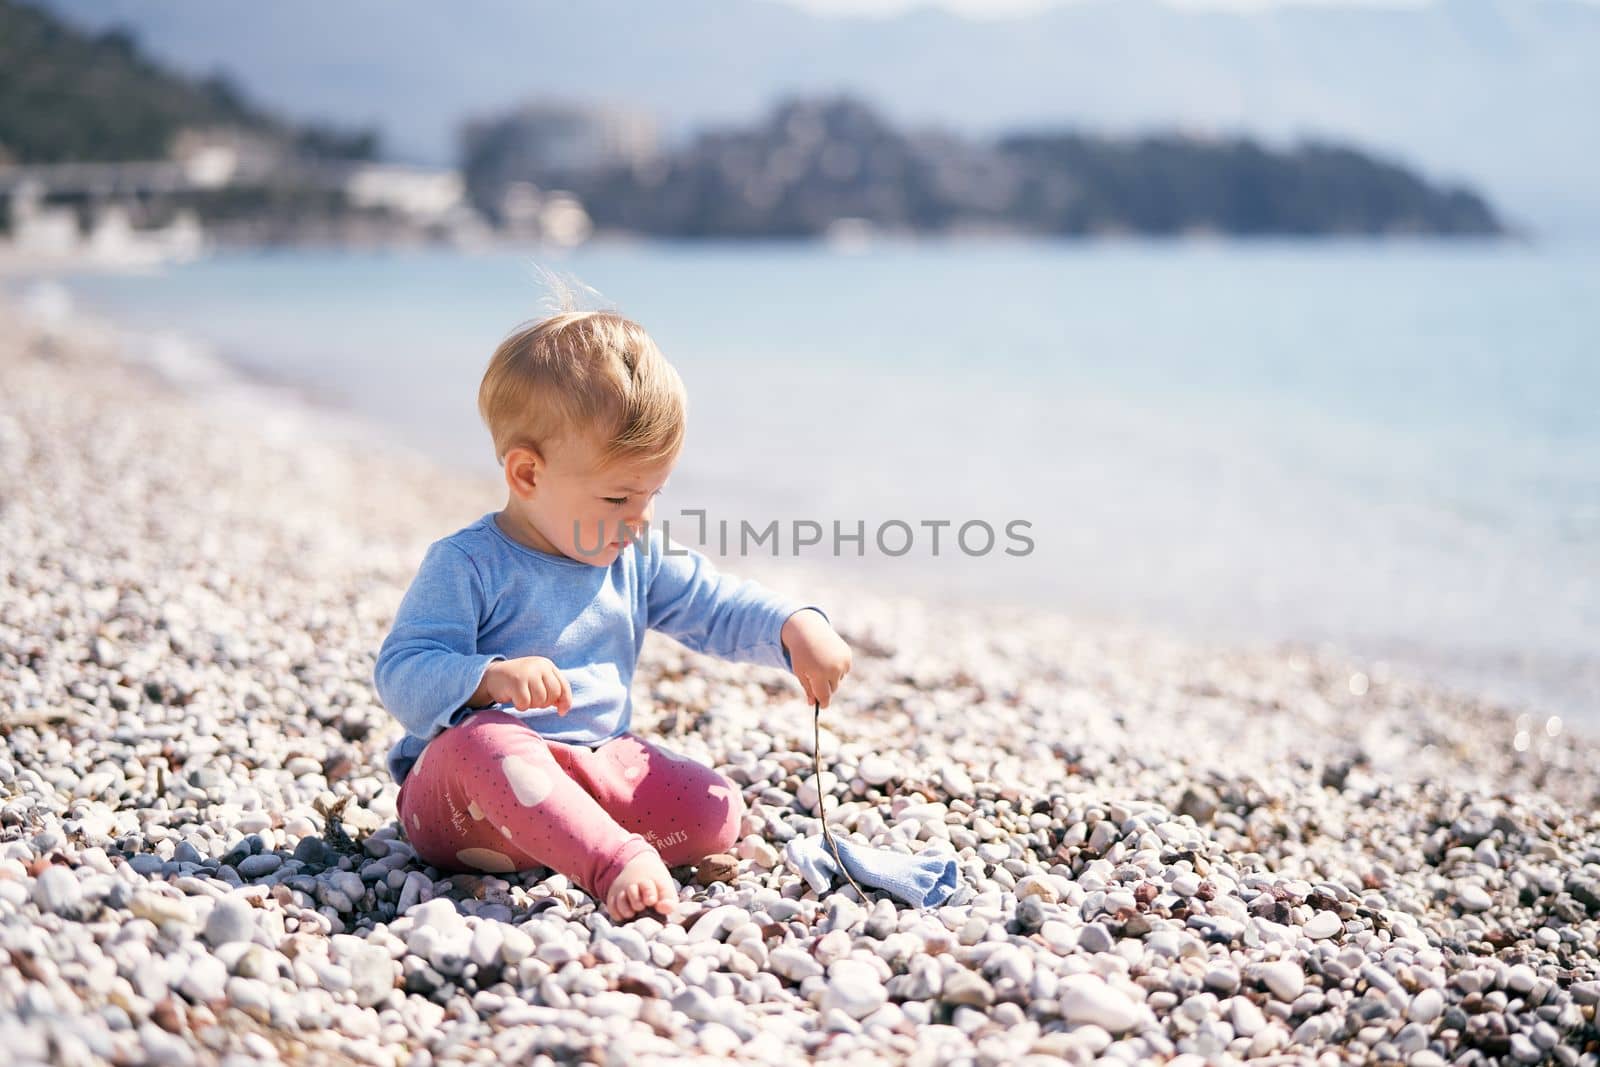 Little kid in a blue blouse and red pants sits on a pebble beach holding a stick in his hand by Nadtochiy